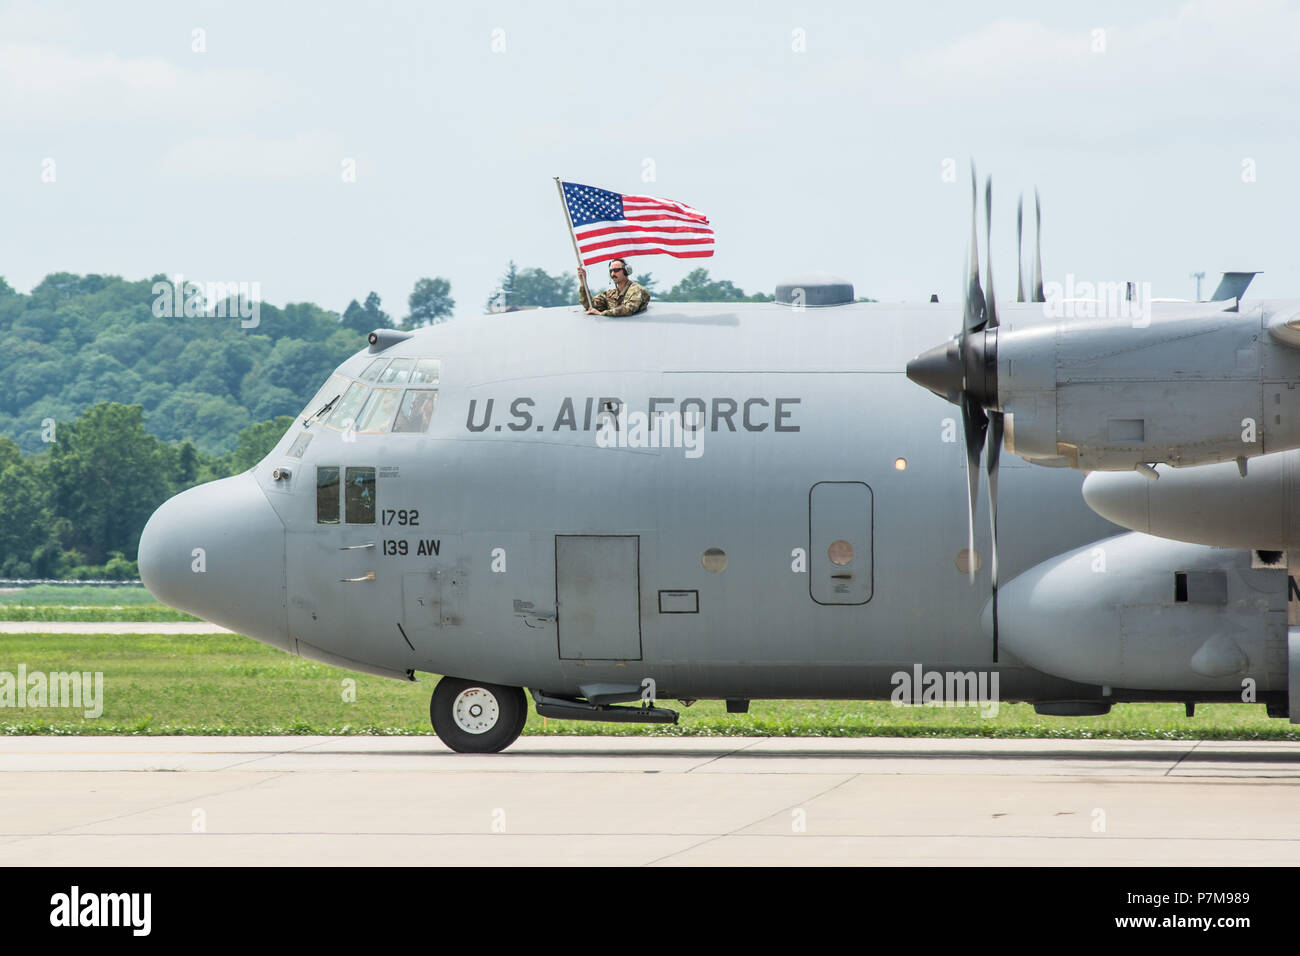 U.S. Airmen assigned to the 139th Airlift Wing, Missouri Air National Guard, return home from an overseas deployment July 5, 2018 at Rosecrans Air National Guard Base, St. Joseph, Mo. The Airmen were supporting the unit’s C-130 Hercules airlift mission in the U.S. Air Force Central Command area of responsibility. (U.S. Air National Guard photo by Master Sgt. Michael Crane) Stock Photo